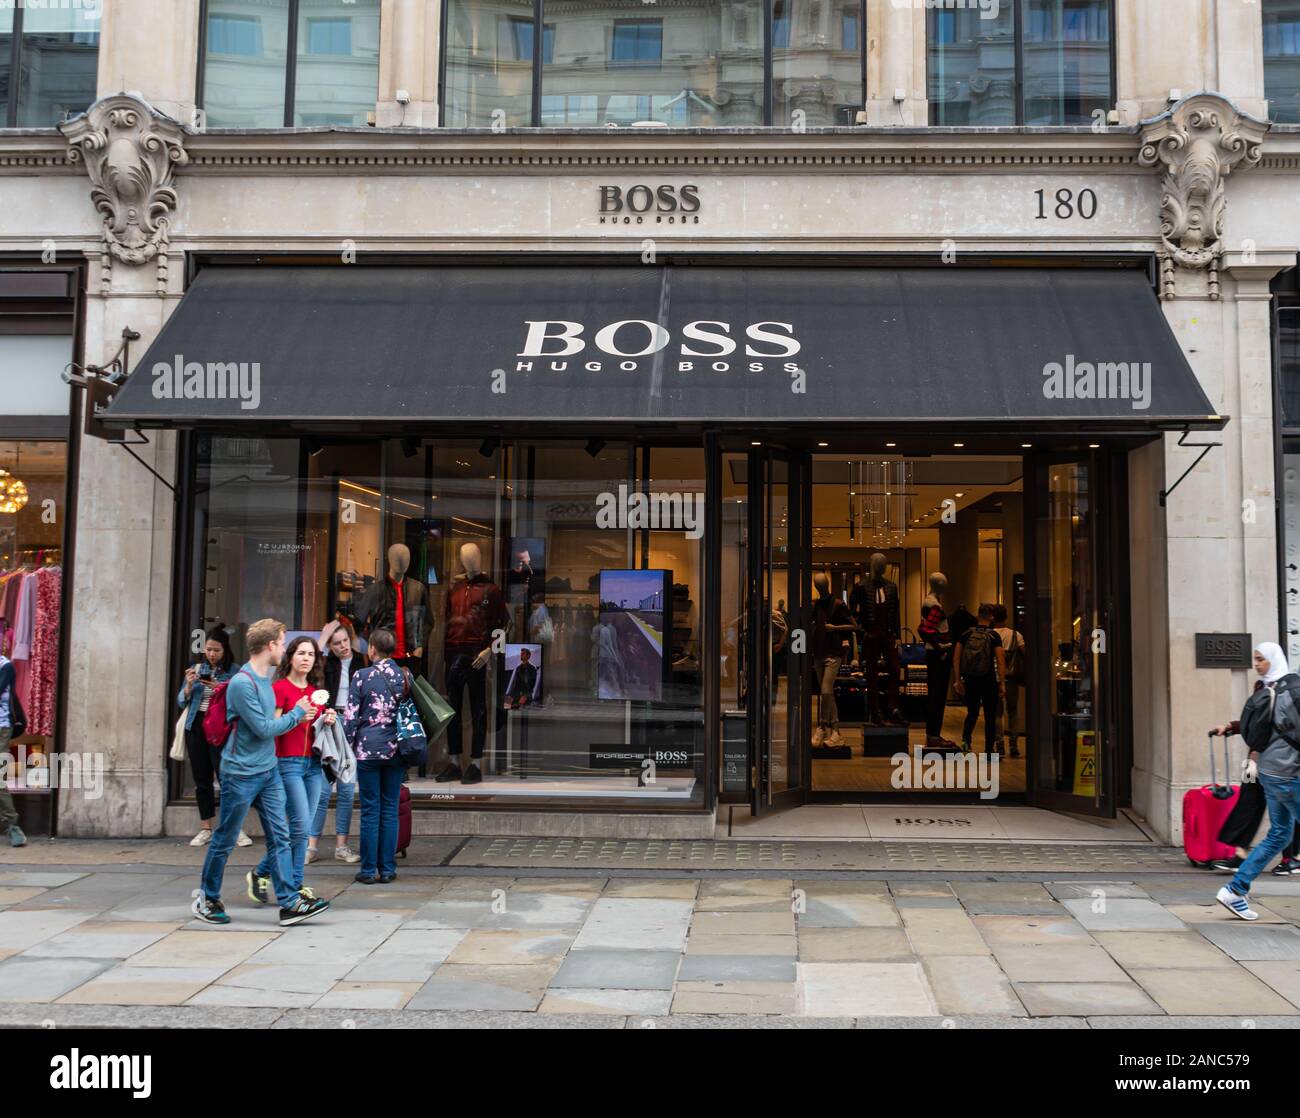 Hugo boss store london hi-res stock photography and images - Alamy